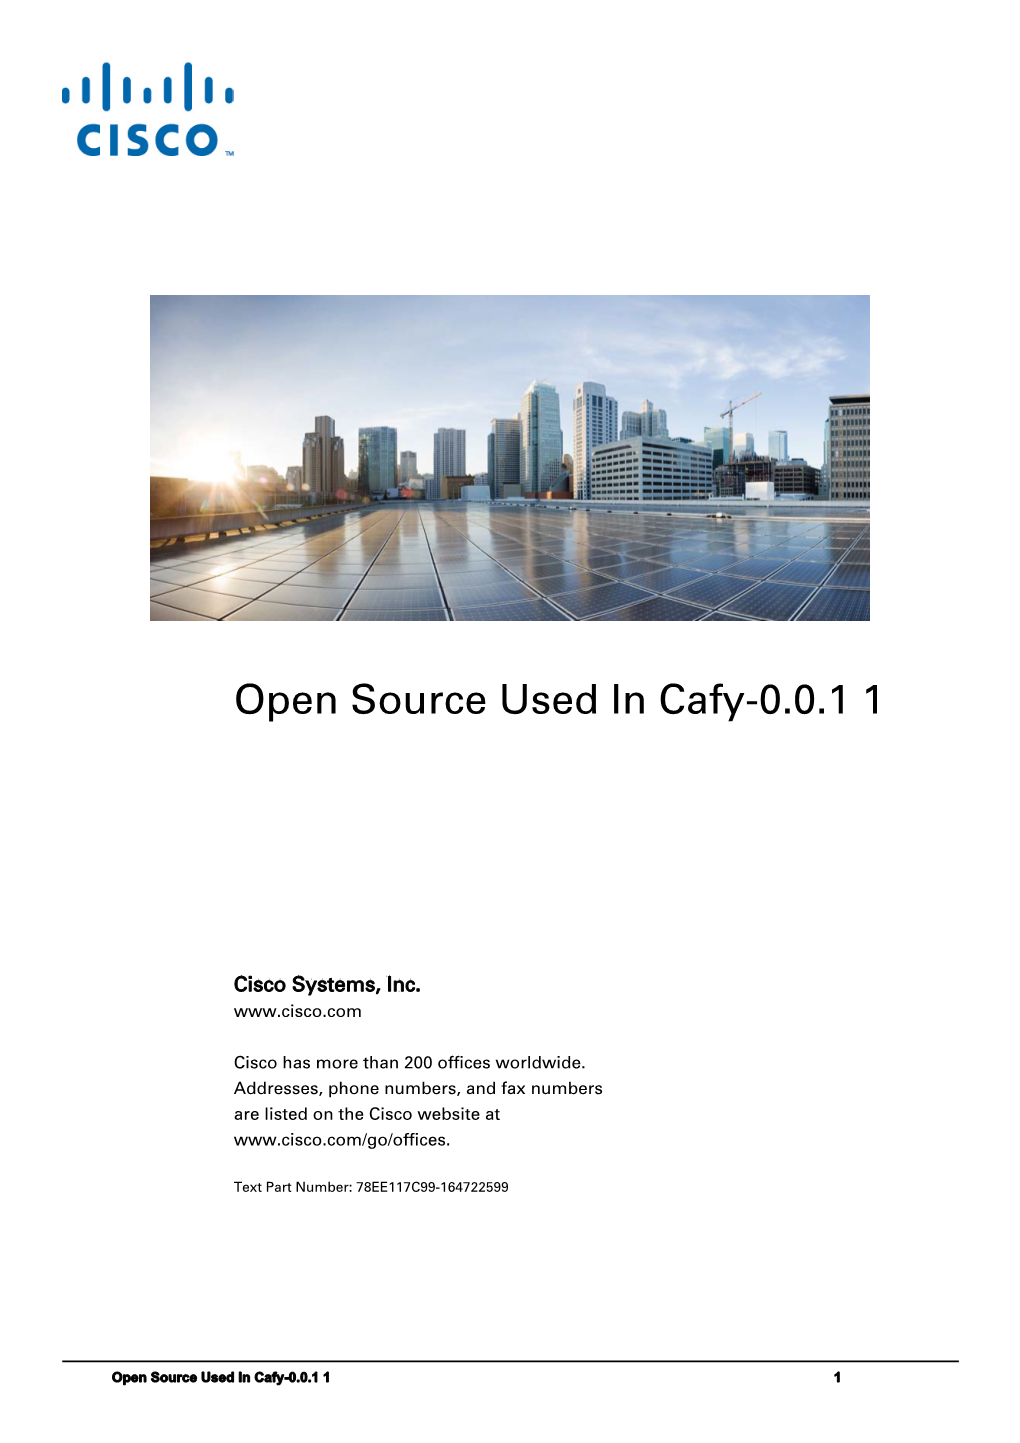 Open Source Used in Cafy-0.0.1 1